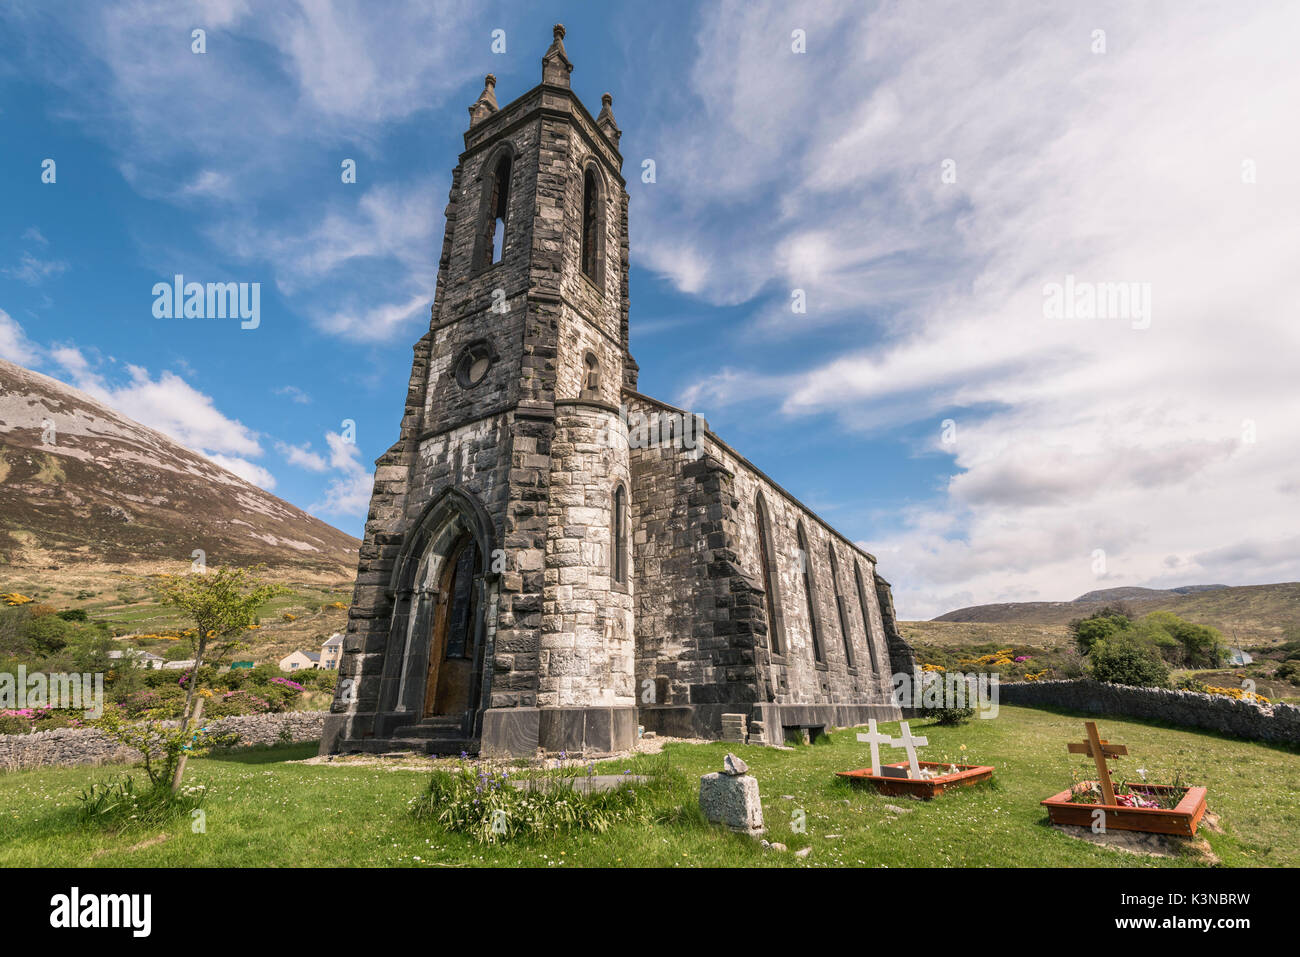 Dunlewy (Dunlewey) Old Church, Poisoned Glen, County Donegal, Ulster region, Ireland, Europe. Stock Photo